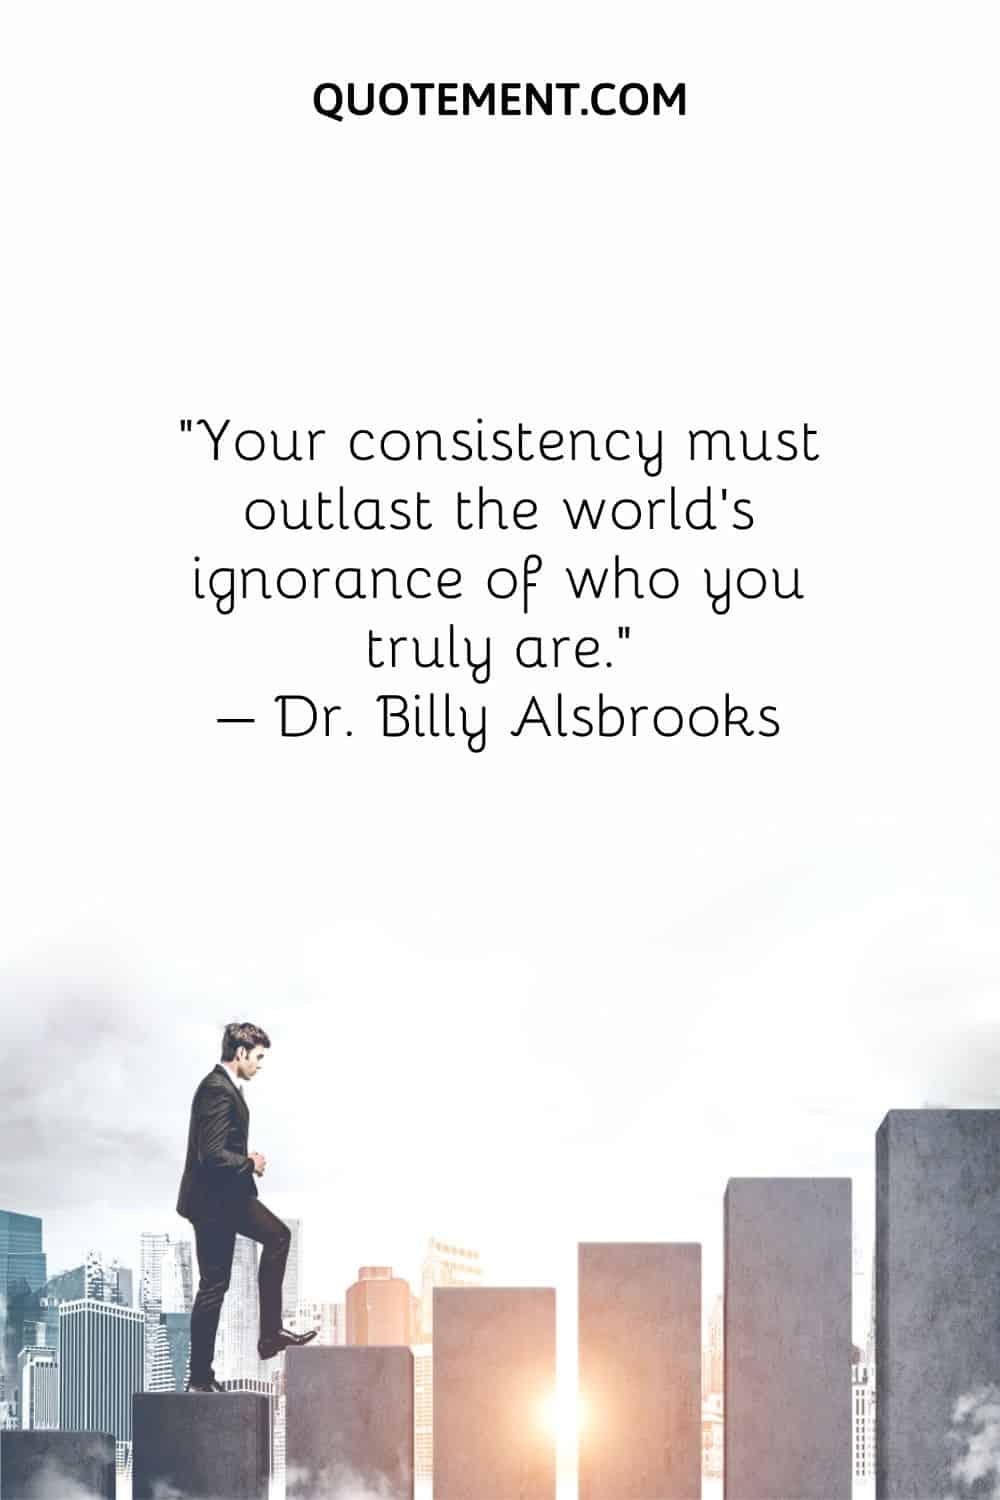 Your consistency must outlast the world's ignorance of who you truly are